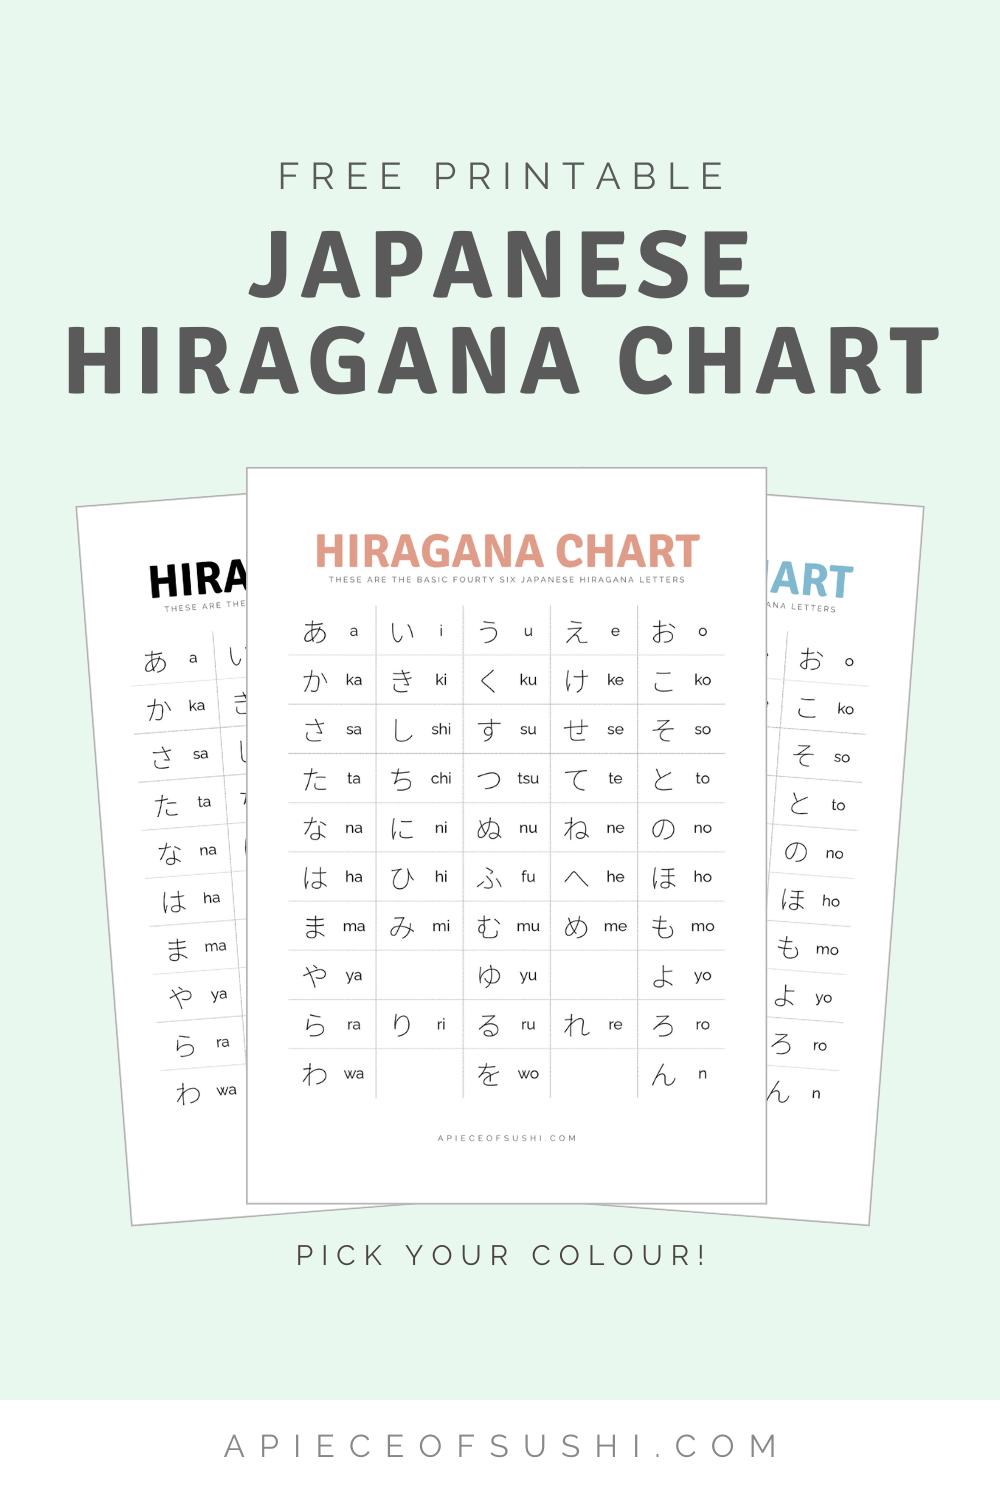 hiragana-chart-free-download-printable-pdf-with-3-different-colours